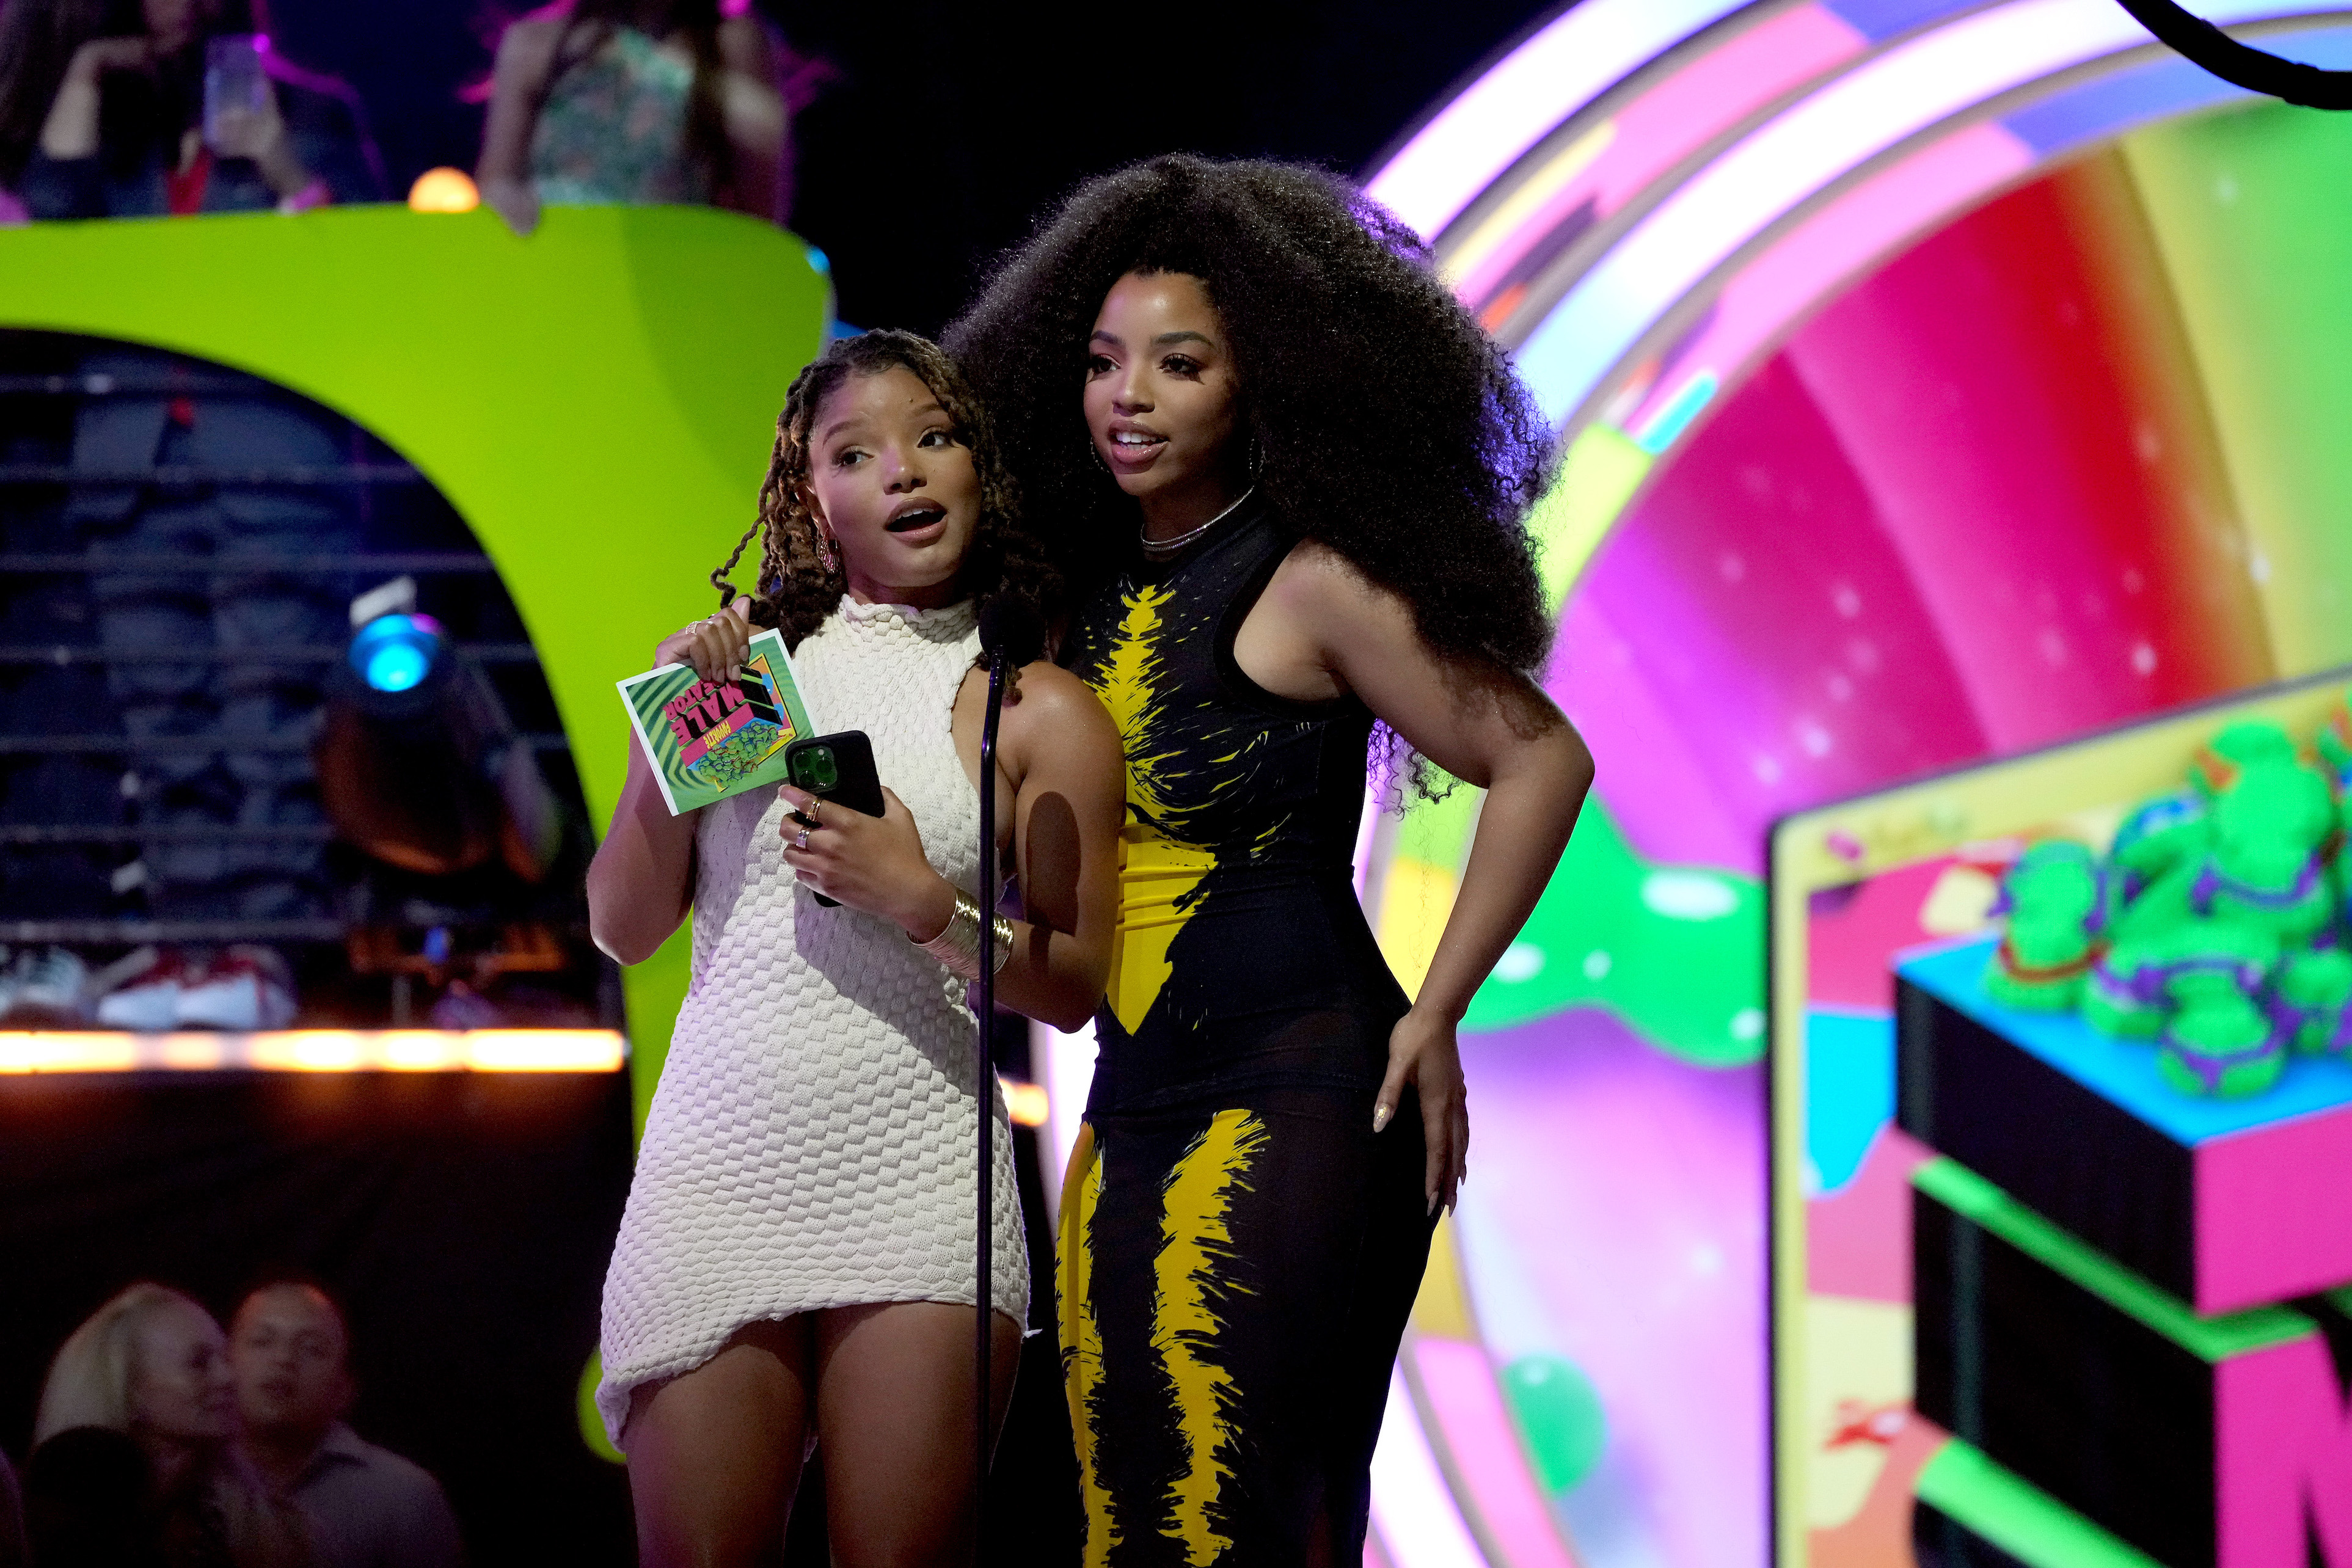 Halle Bailey and Chloe Bailey speak during the Nickelodeon's Kids' Choice Awards 2022